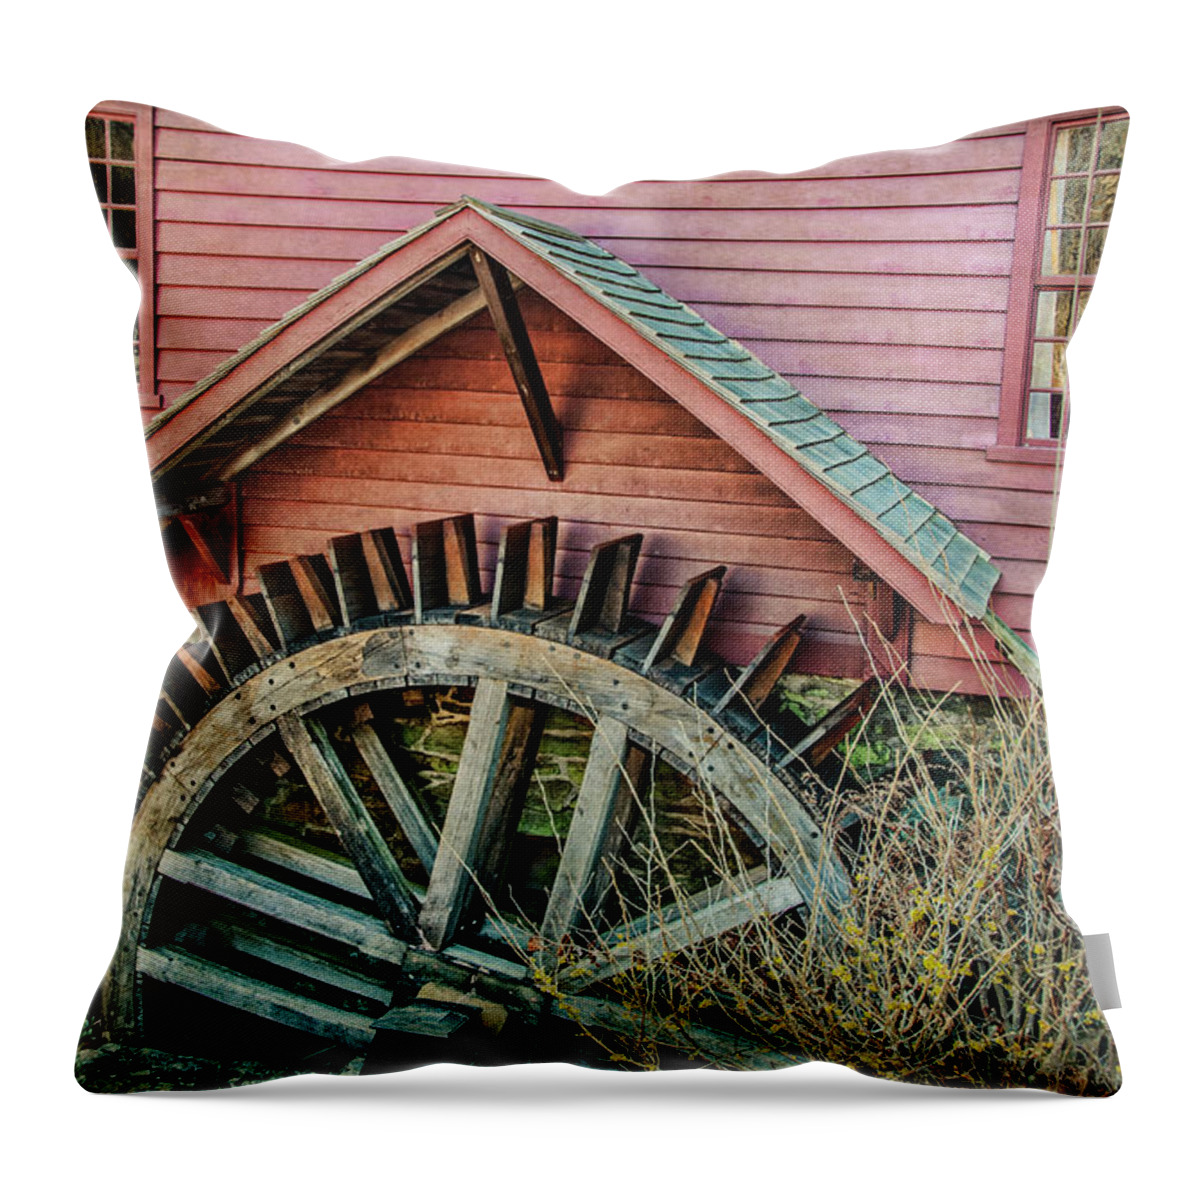 Building Throw Pillow featuring the photograph Water Wheel by Cathy Kovarik